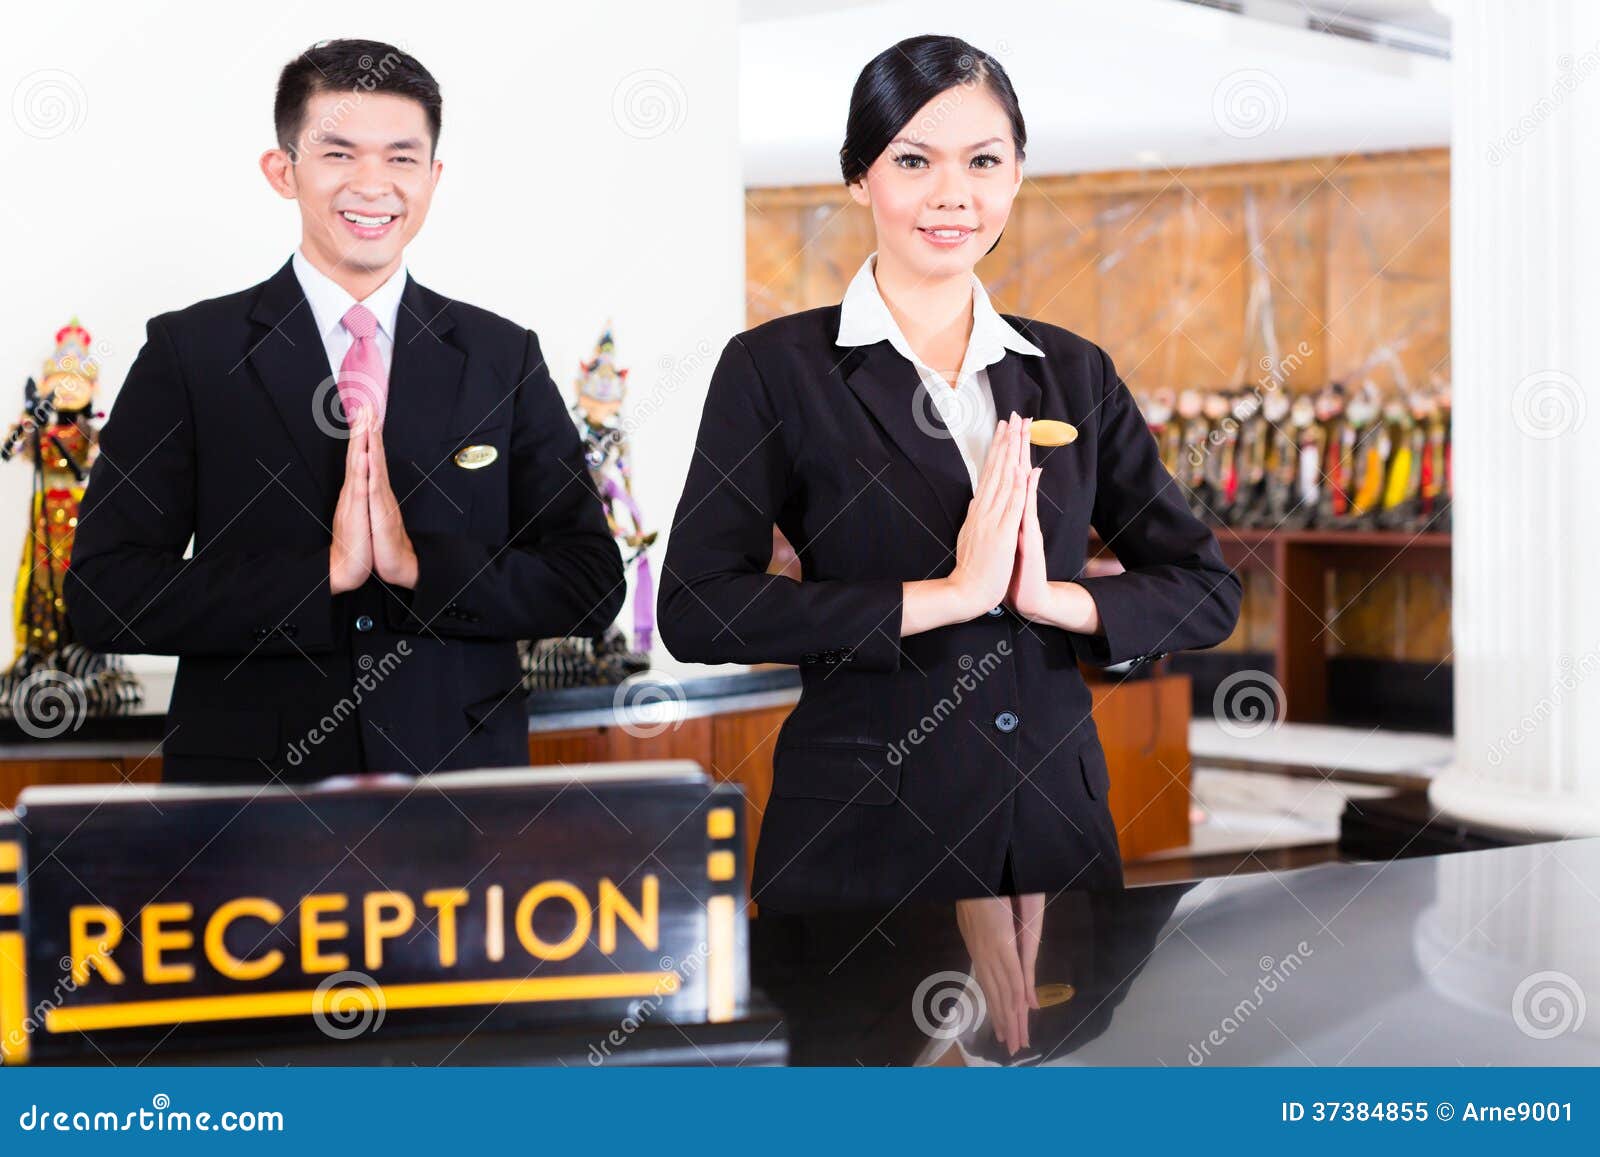 what makes a good hotel receptionist